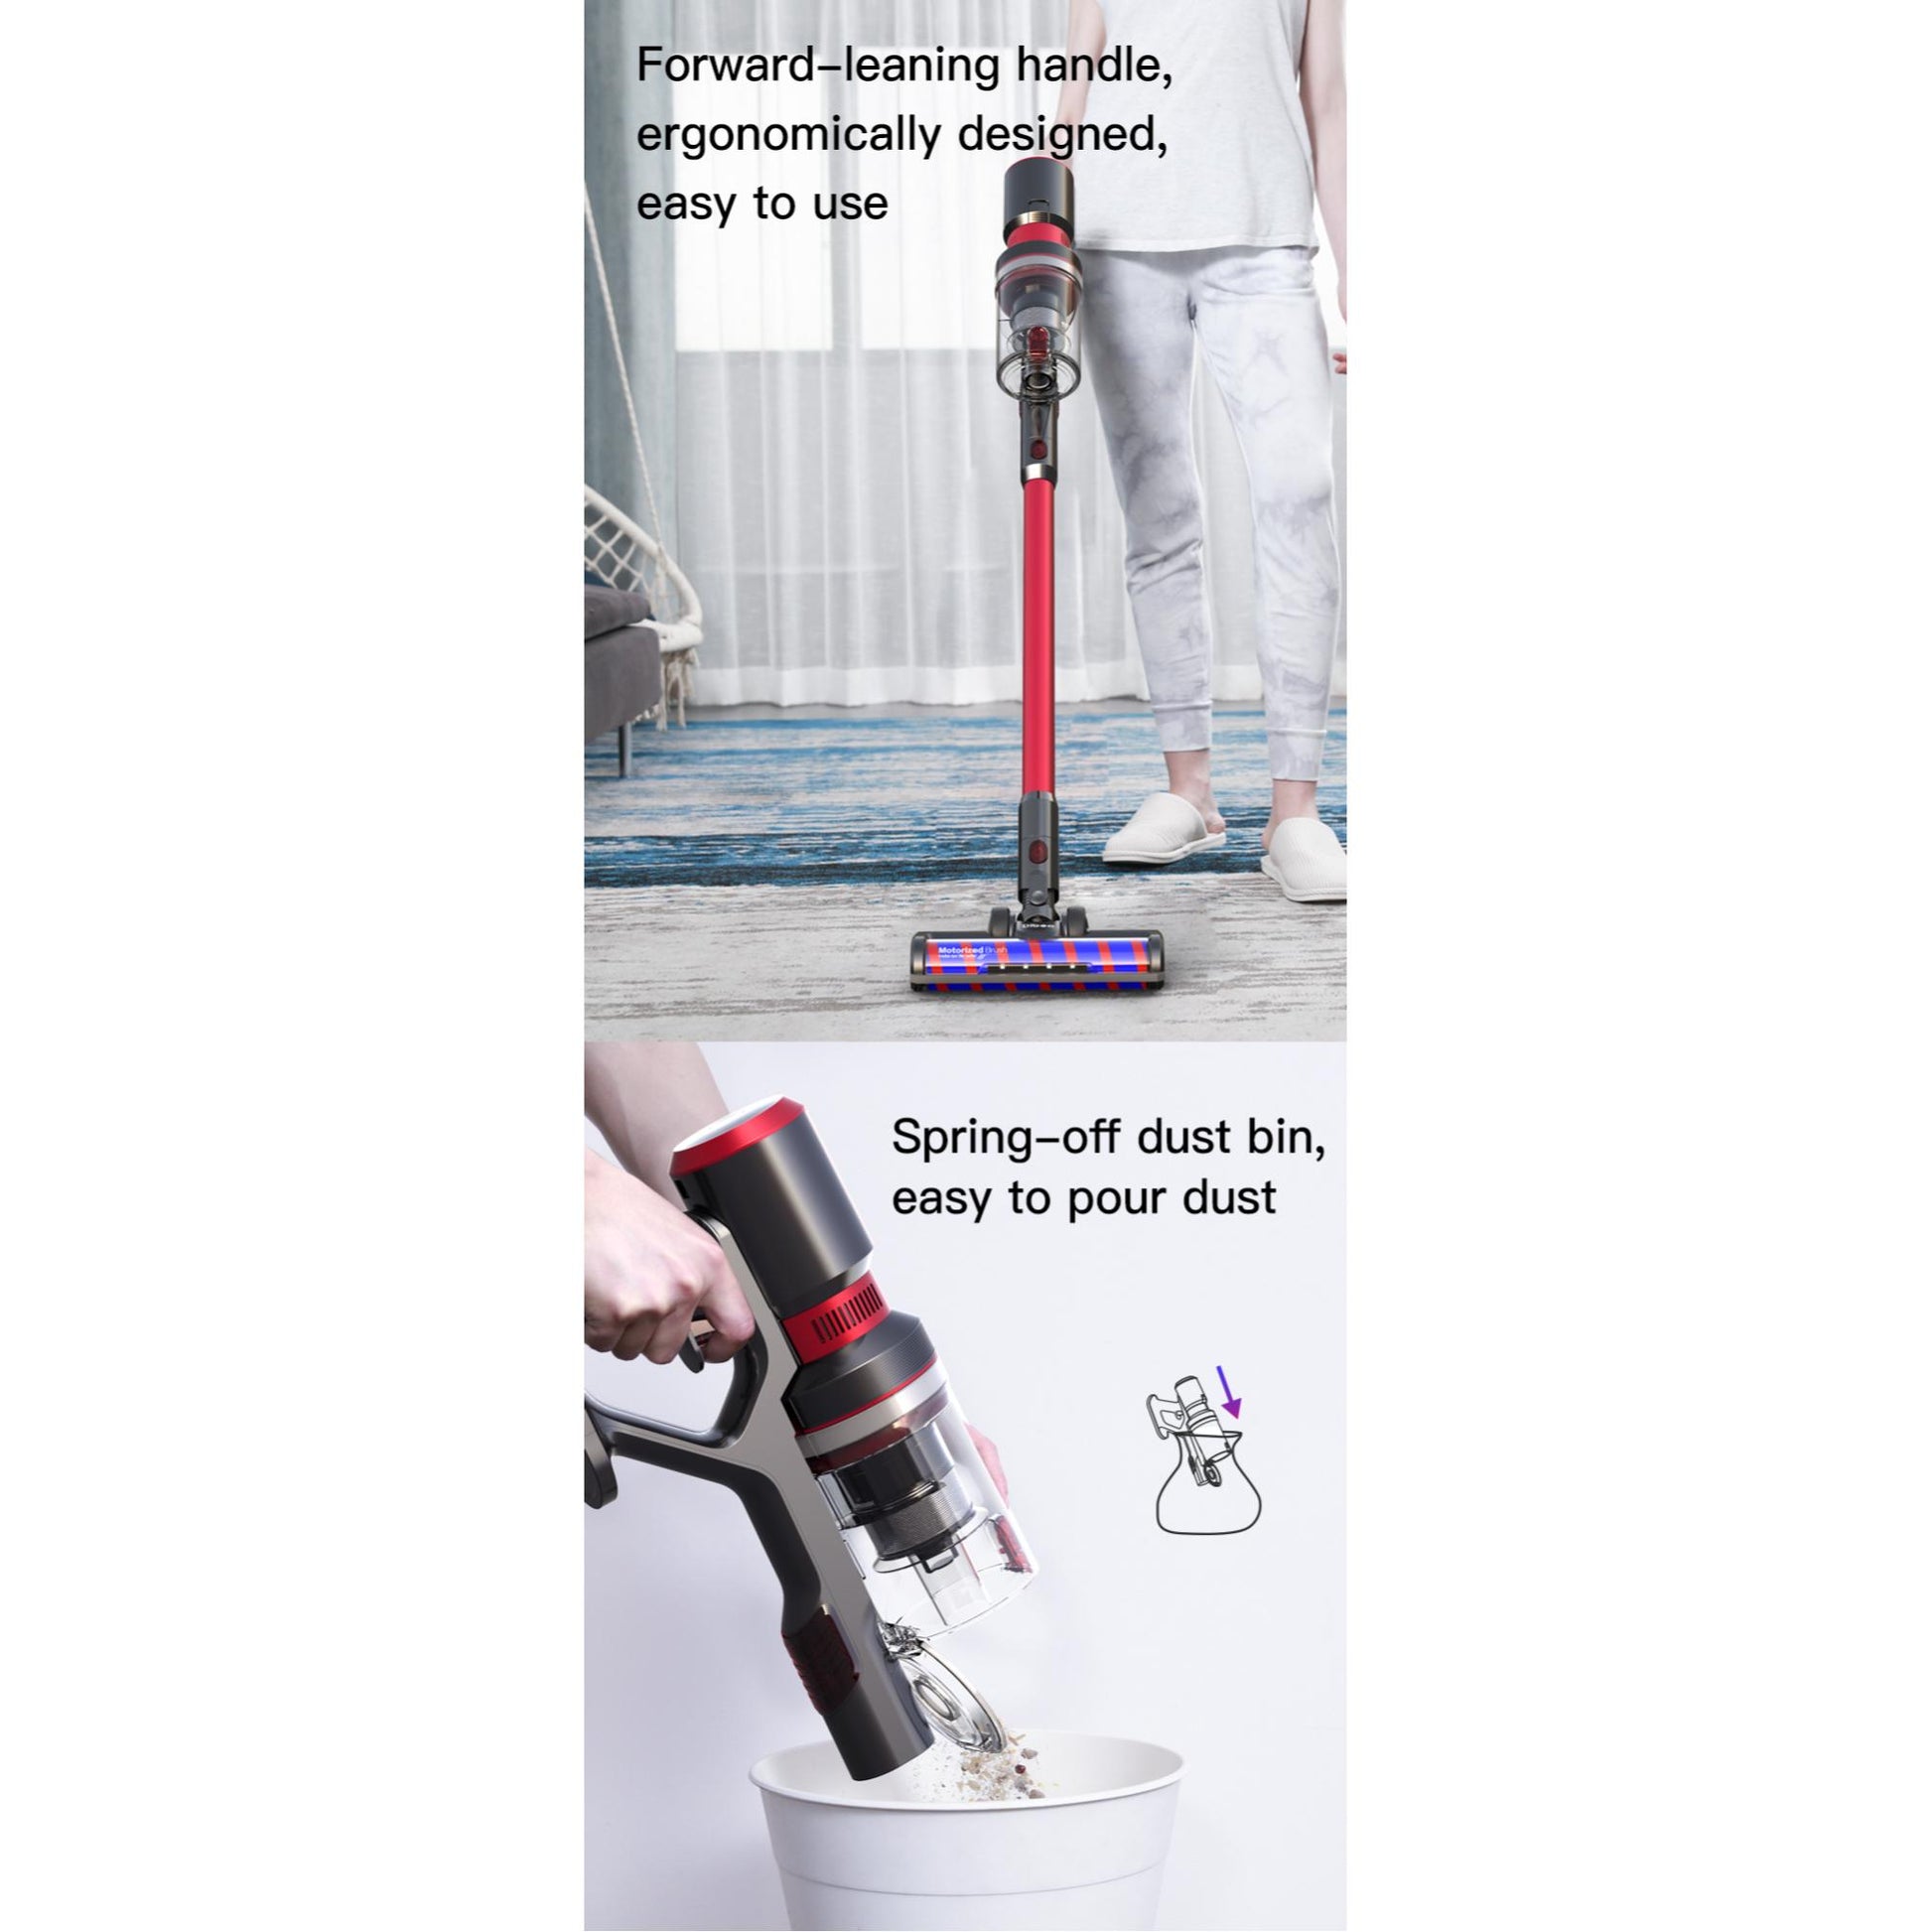 Dibea F20 Max Innovative Stick Vacuum technology, optimizing suction power for thorough dirt removal. | Blue Chilli Electronics.